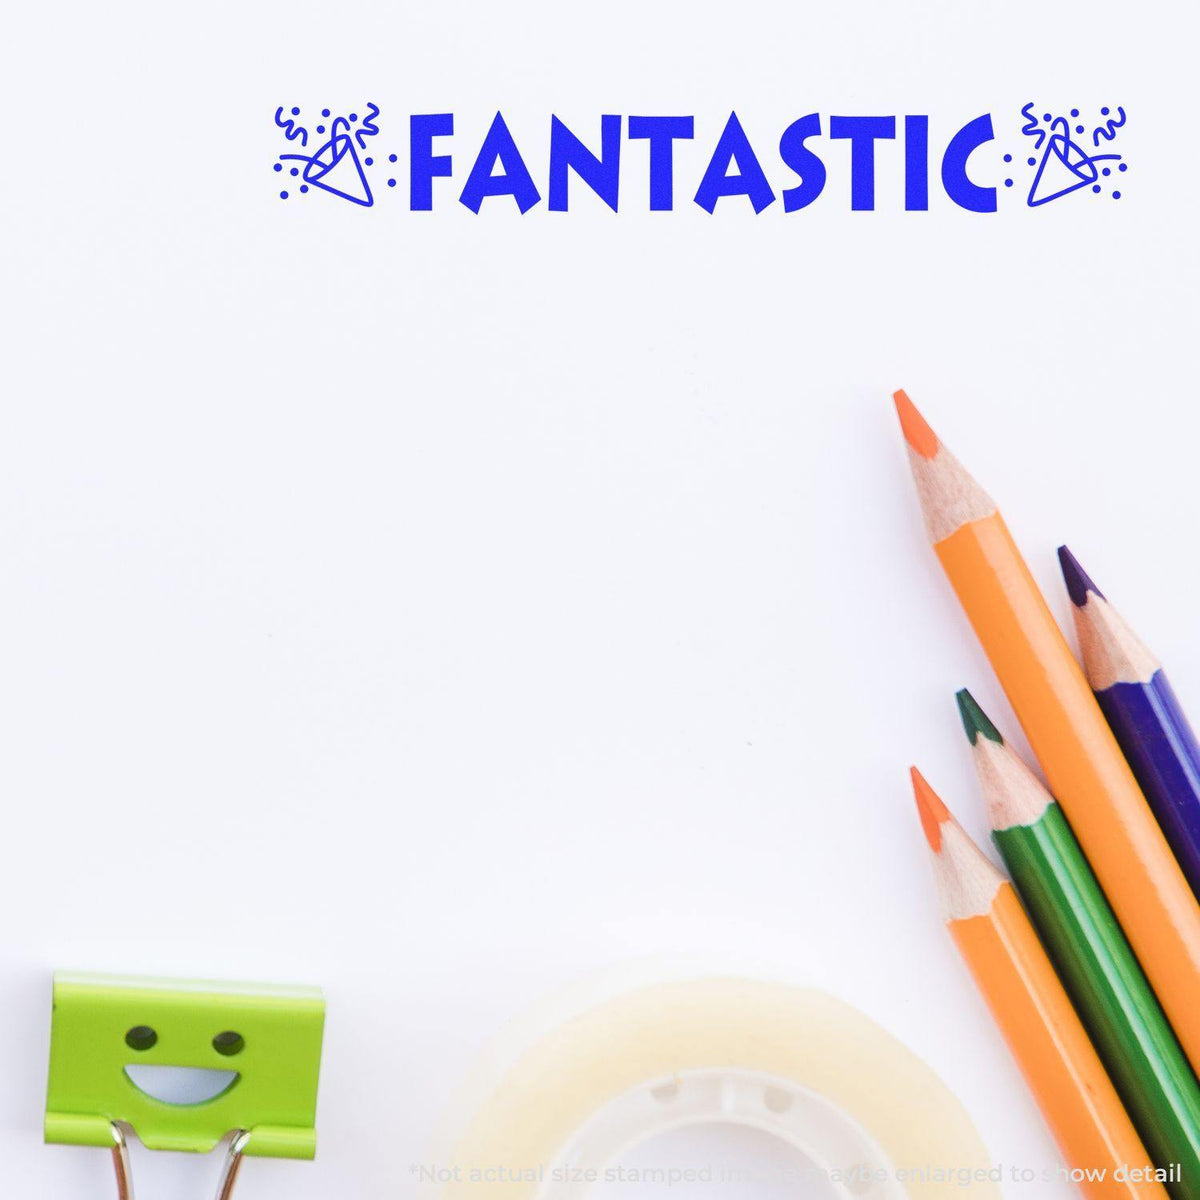 Self-Inking Fantastic with Icons Stamp - Engineer Seal Stamps - Brand_Trodat, Impression Size_Small, Stamp Type_Self-Inking Stamp, Type of Use_Teacher